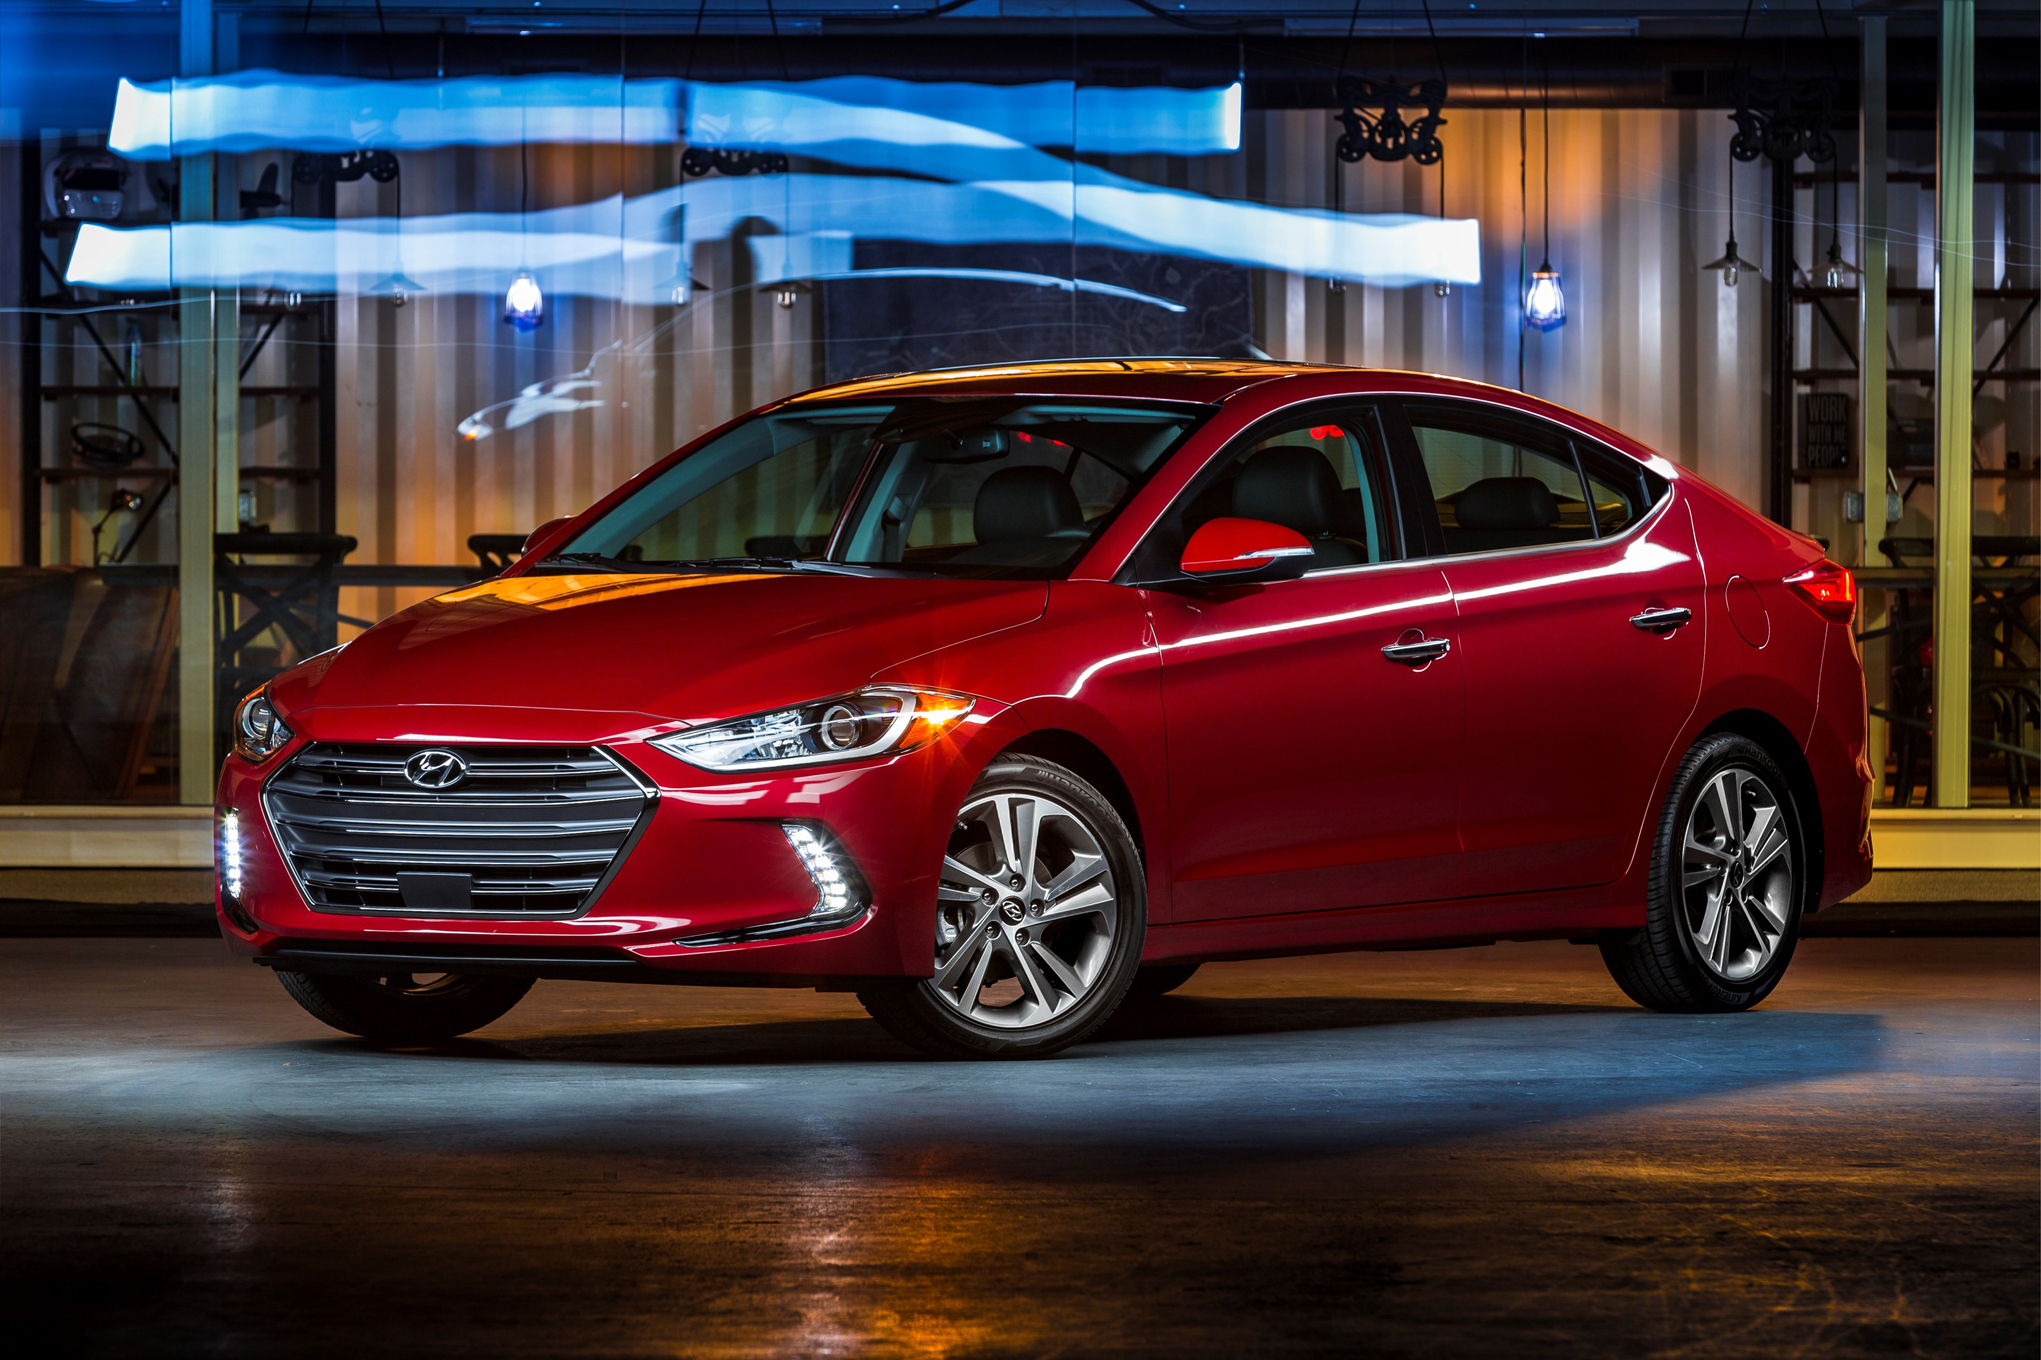 Hyundai Elantra: Top 5 Features That Makes It Stand Out Among The Competitors